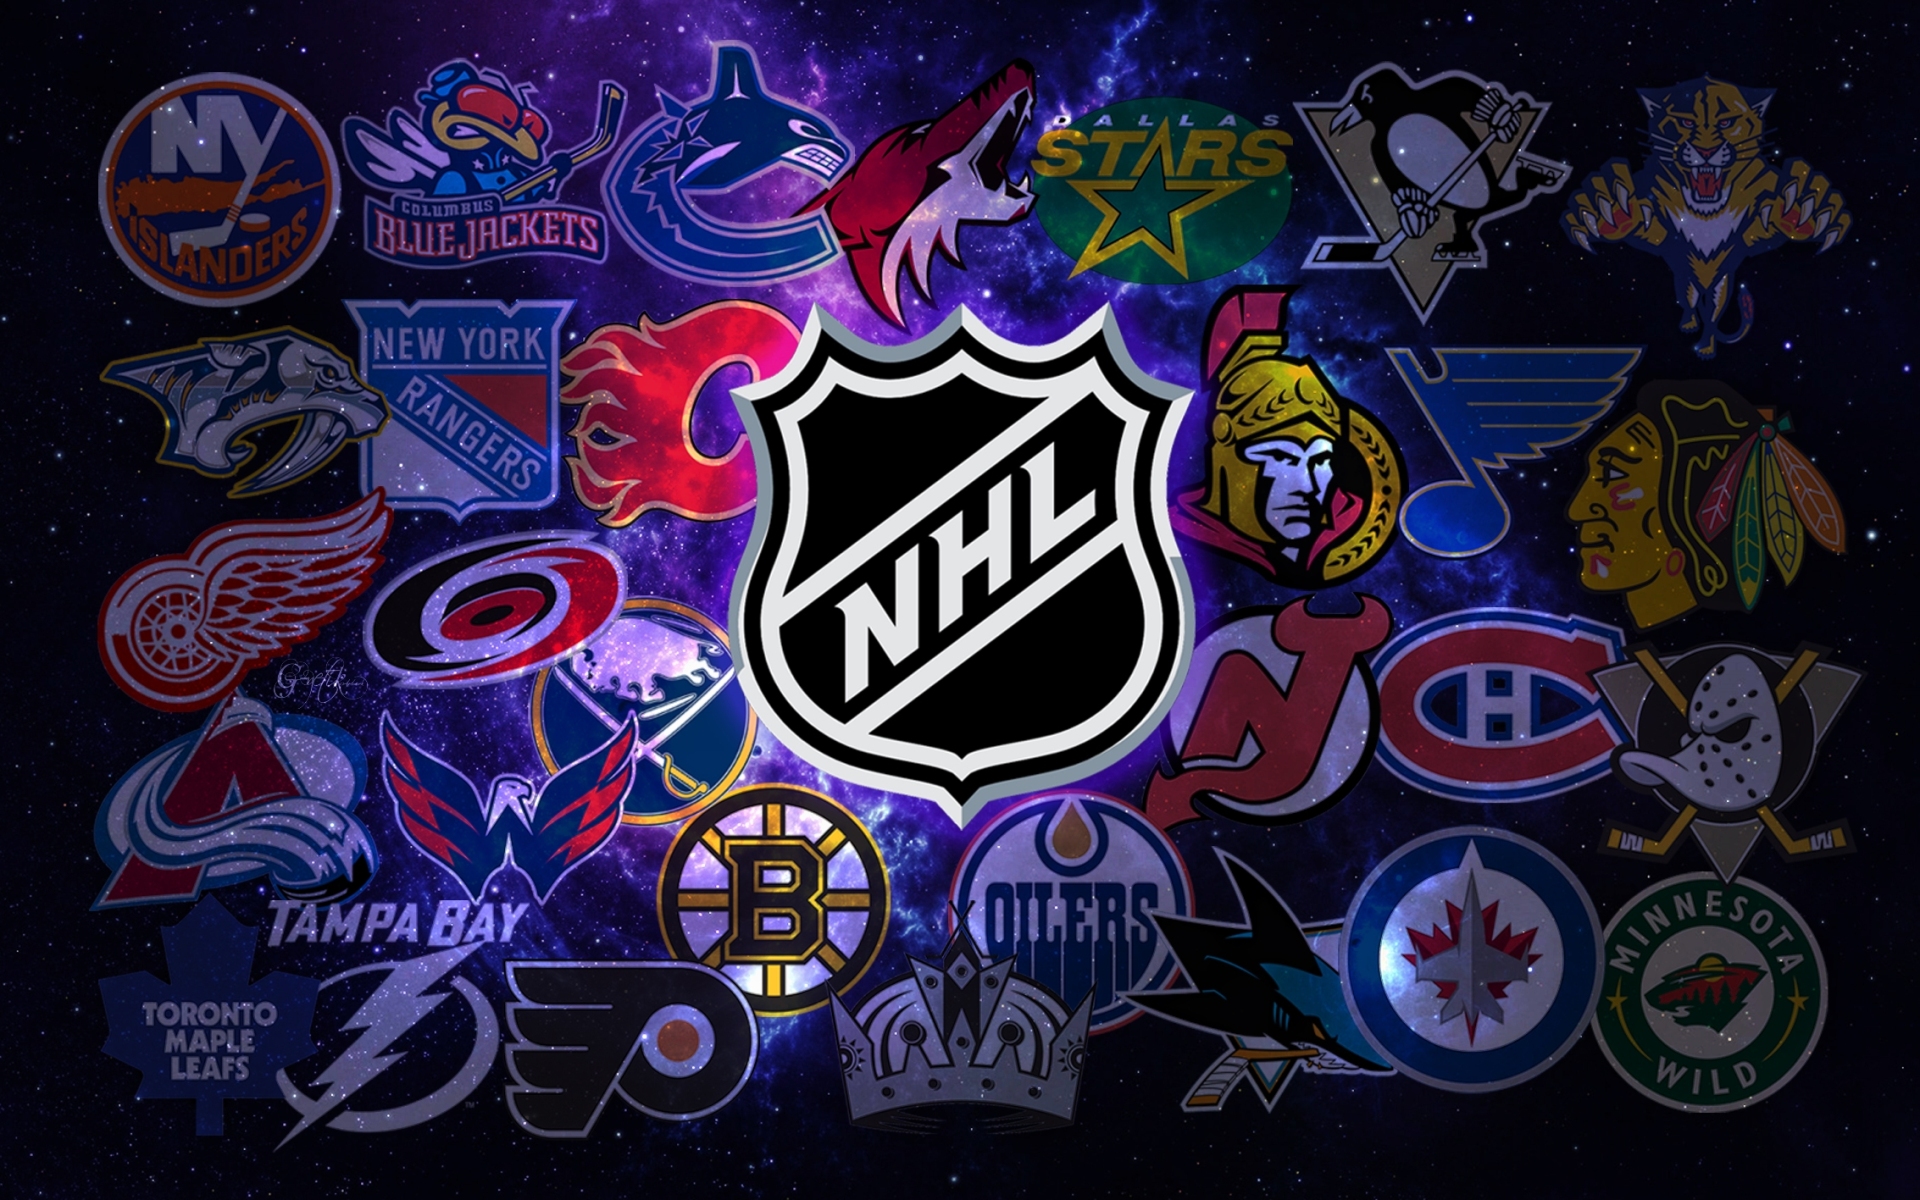  nhl team wallpaper share this awesome nhl hockey wallpaper on facebook